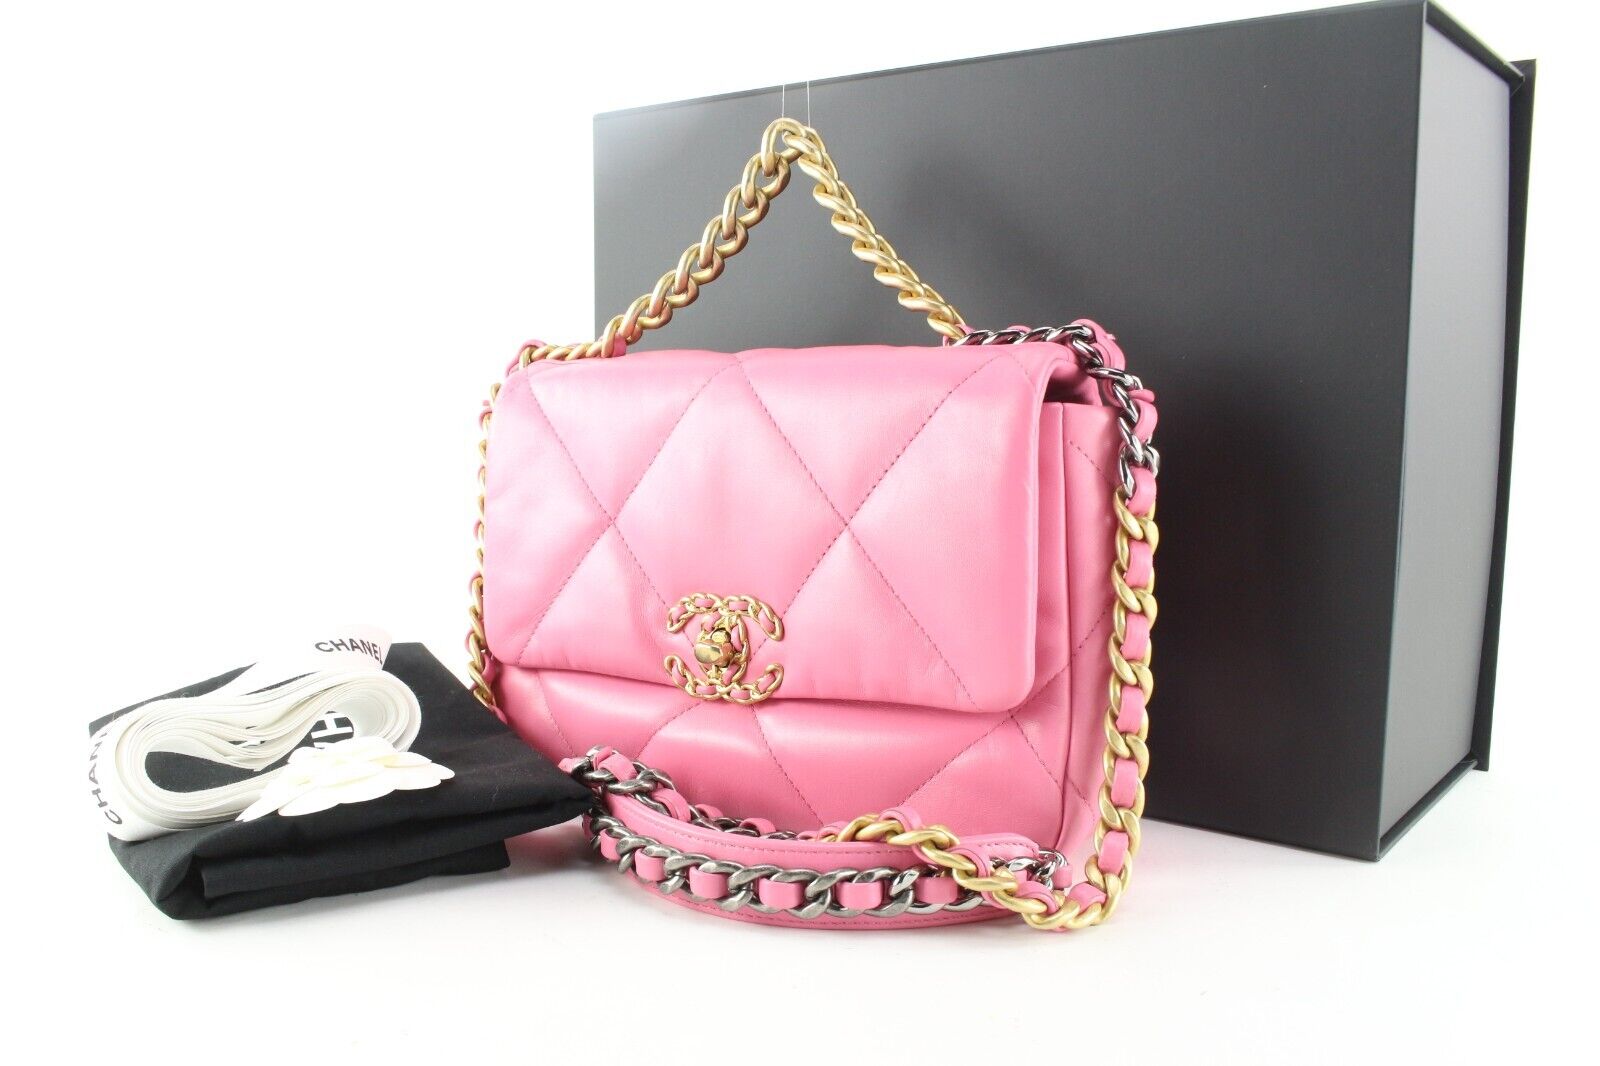 Chanel Lambskin Quilted Large Chanel 19 Flap Light Pink